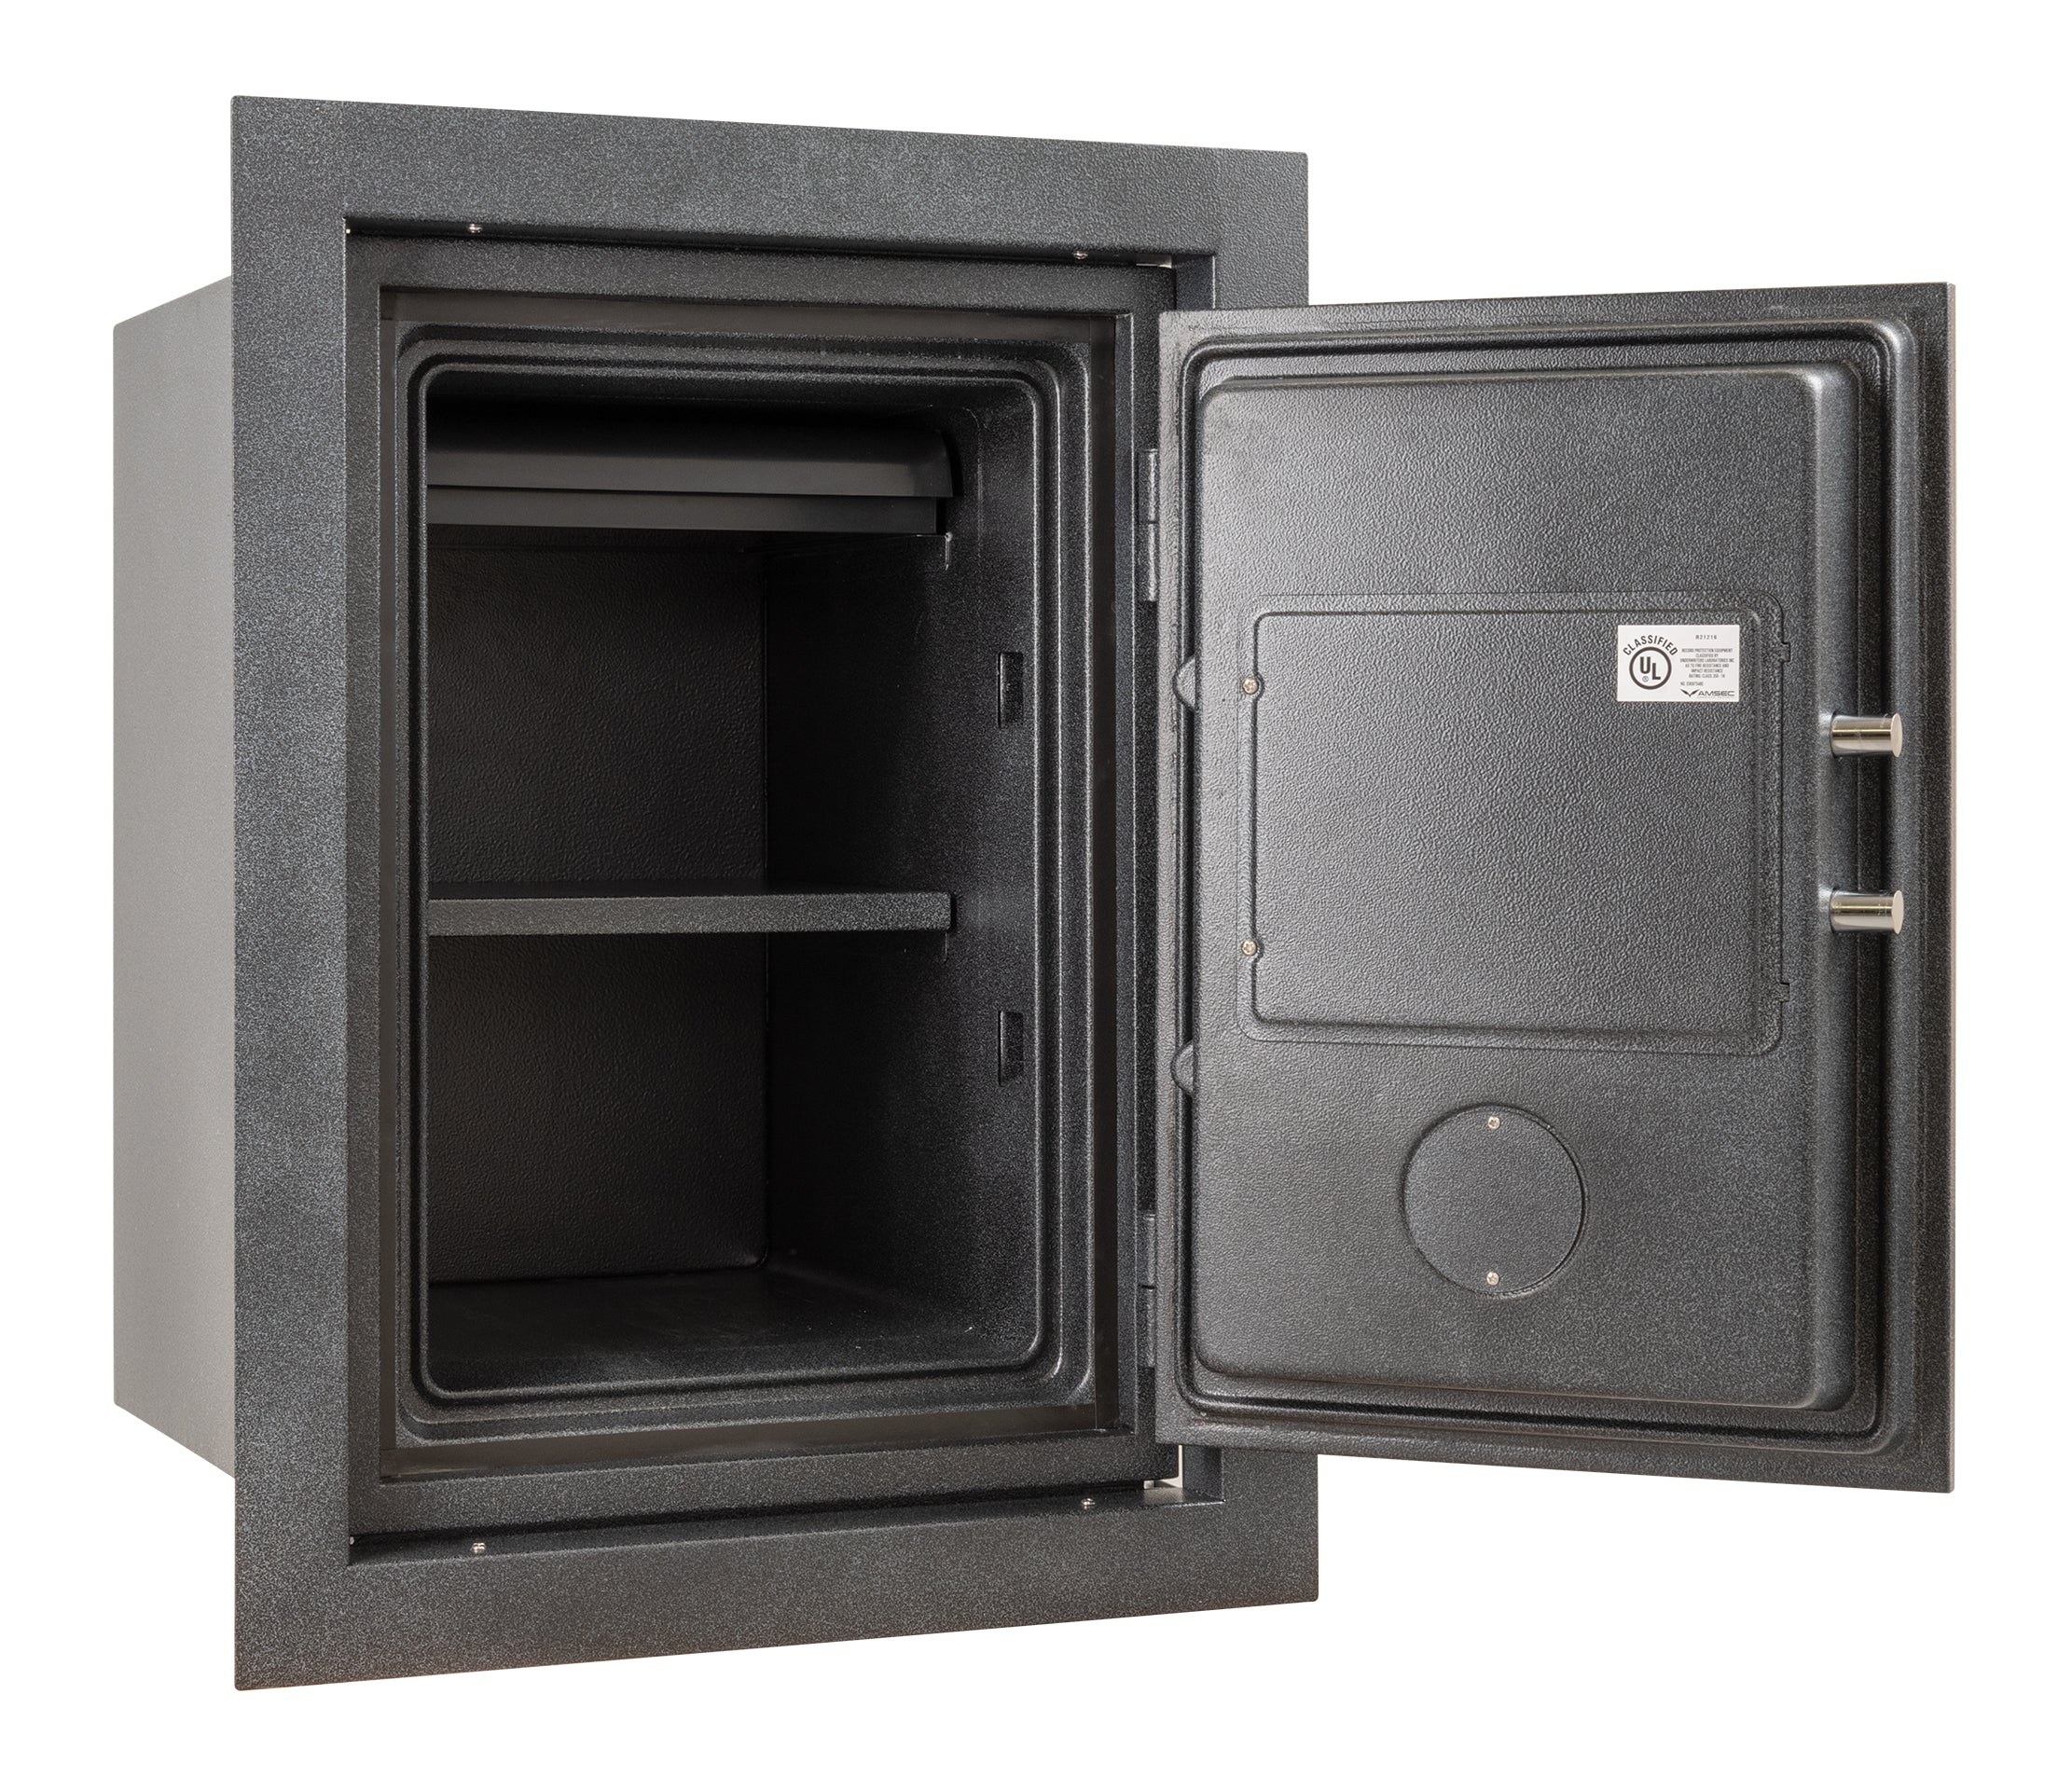 WFS-149E5LP Fire Rated In-Wall Safe